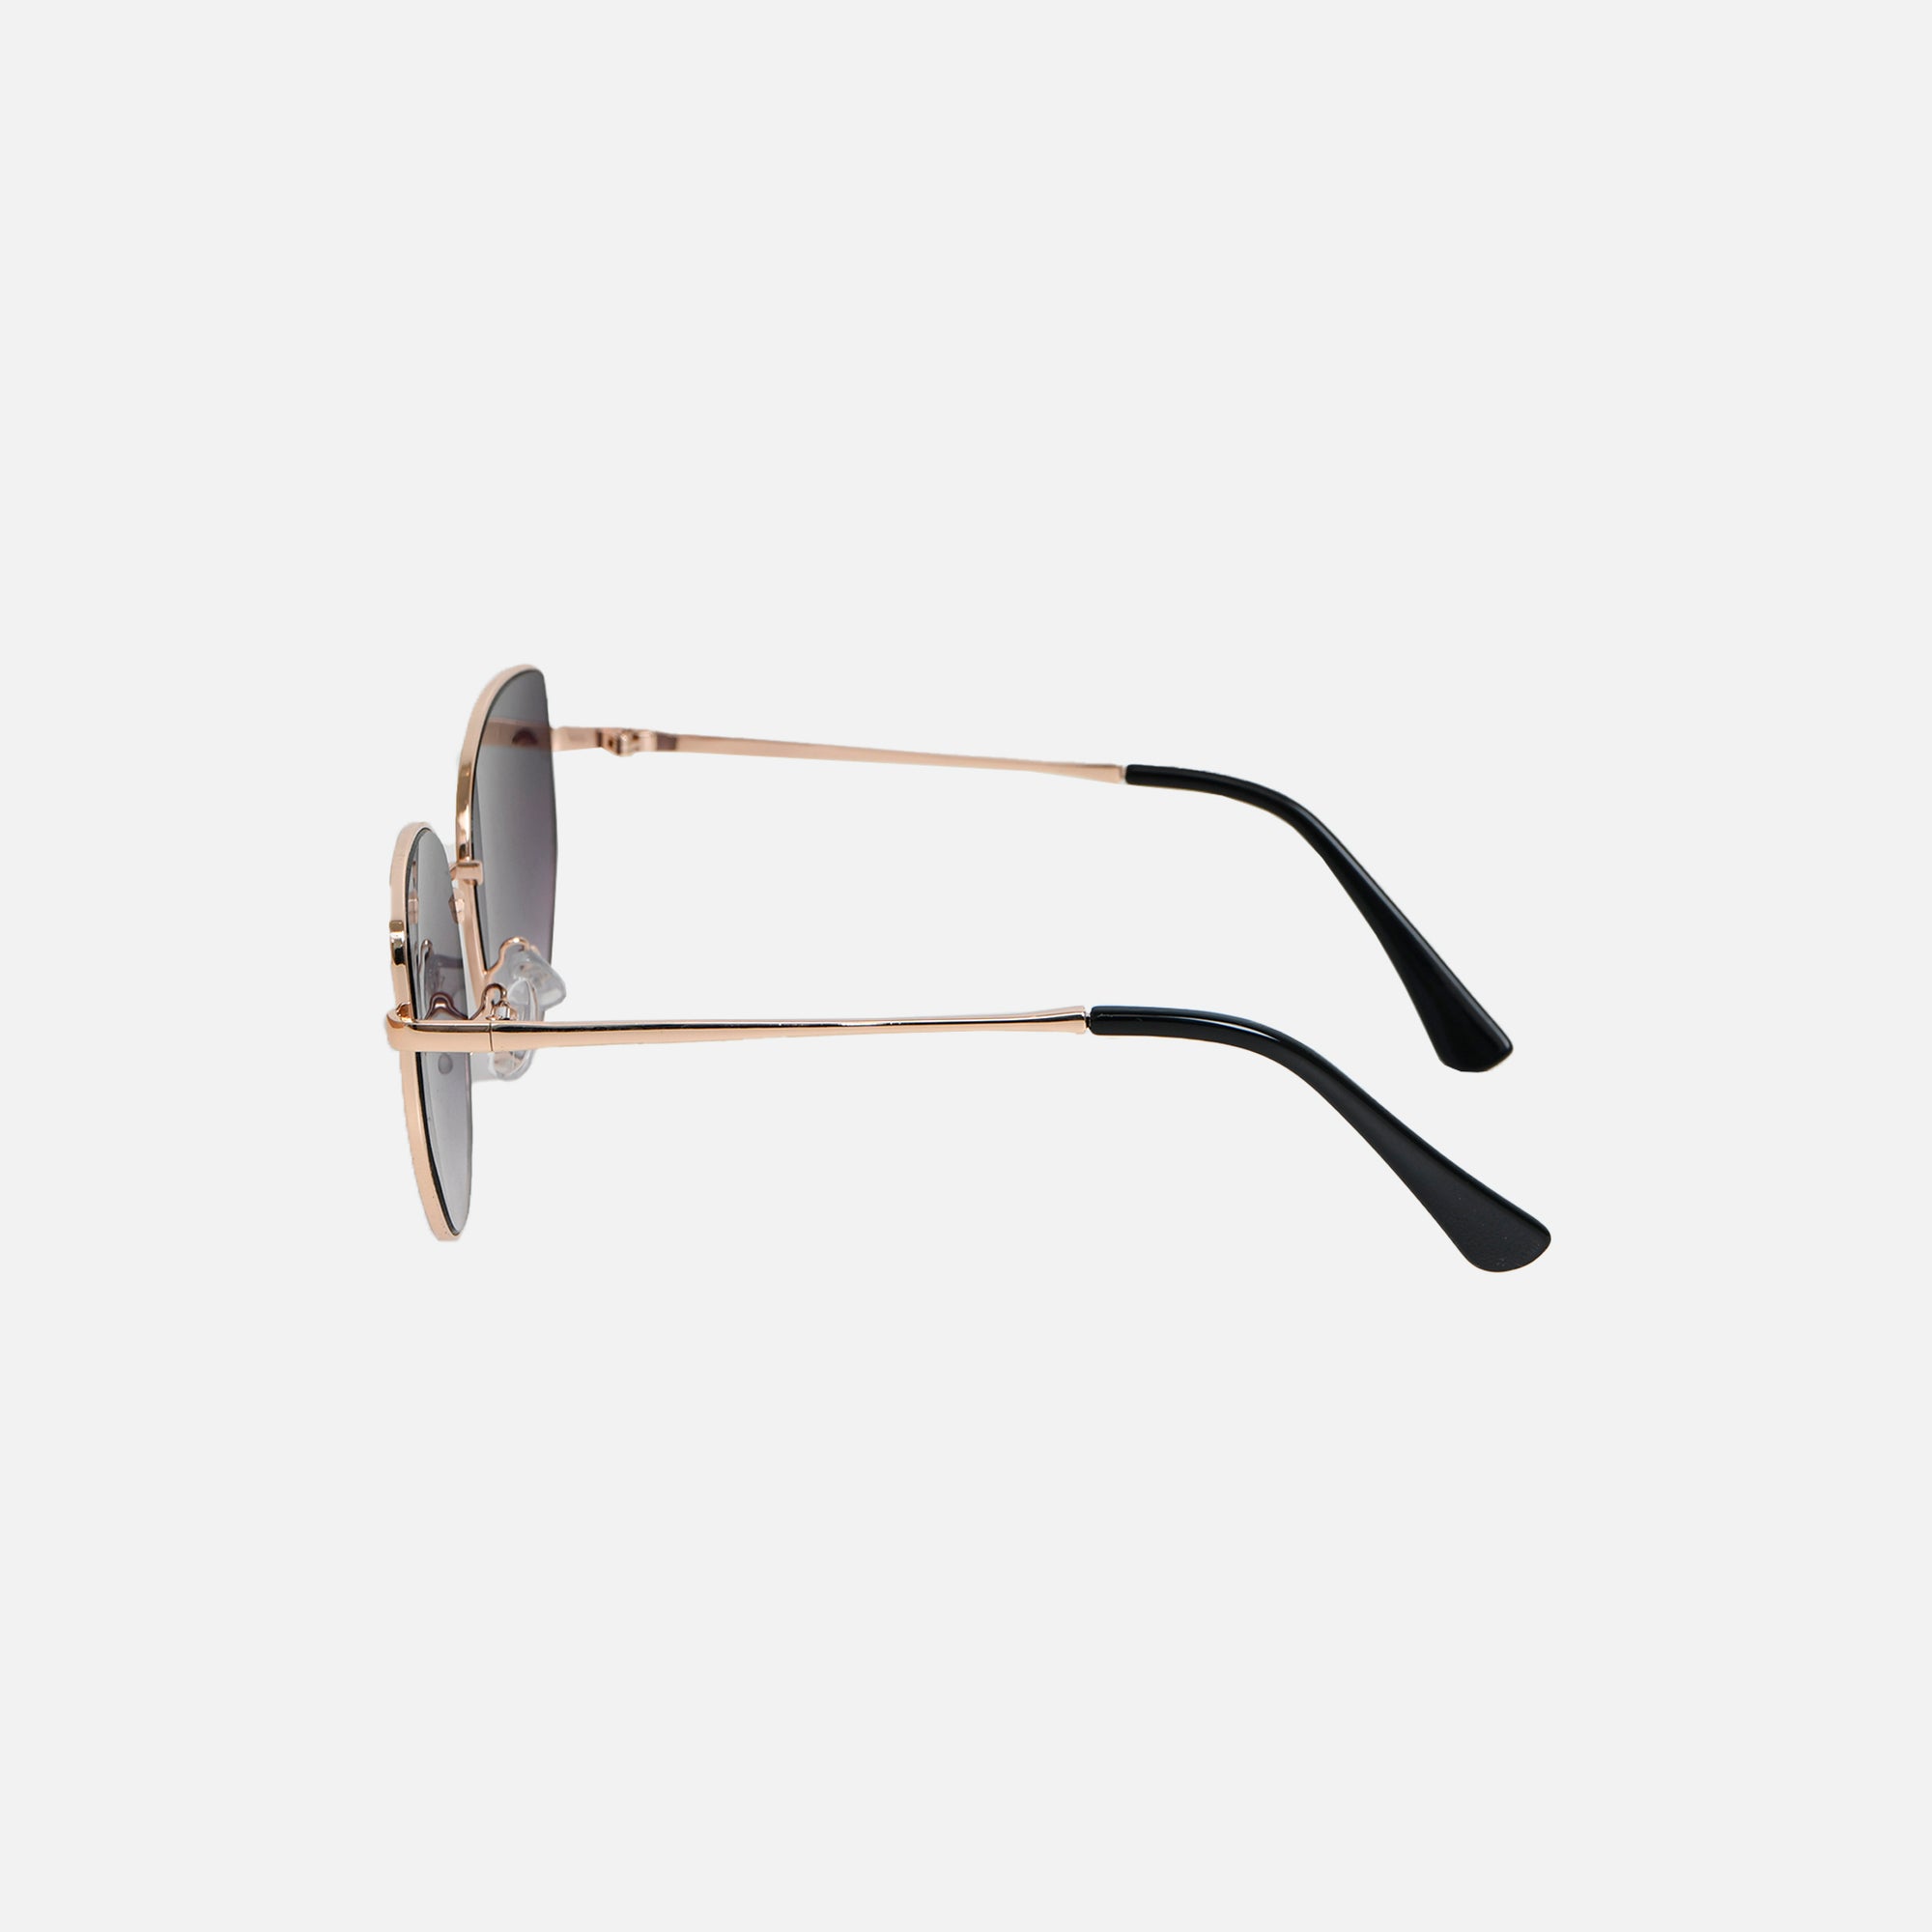 Cat eye sunglasses with thin gold frame